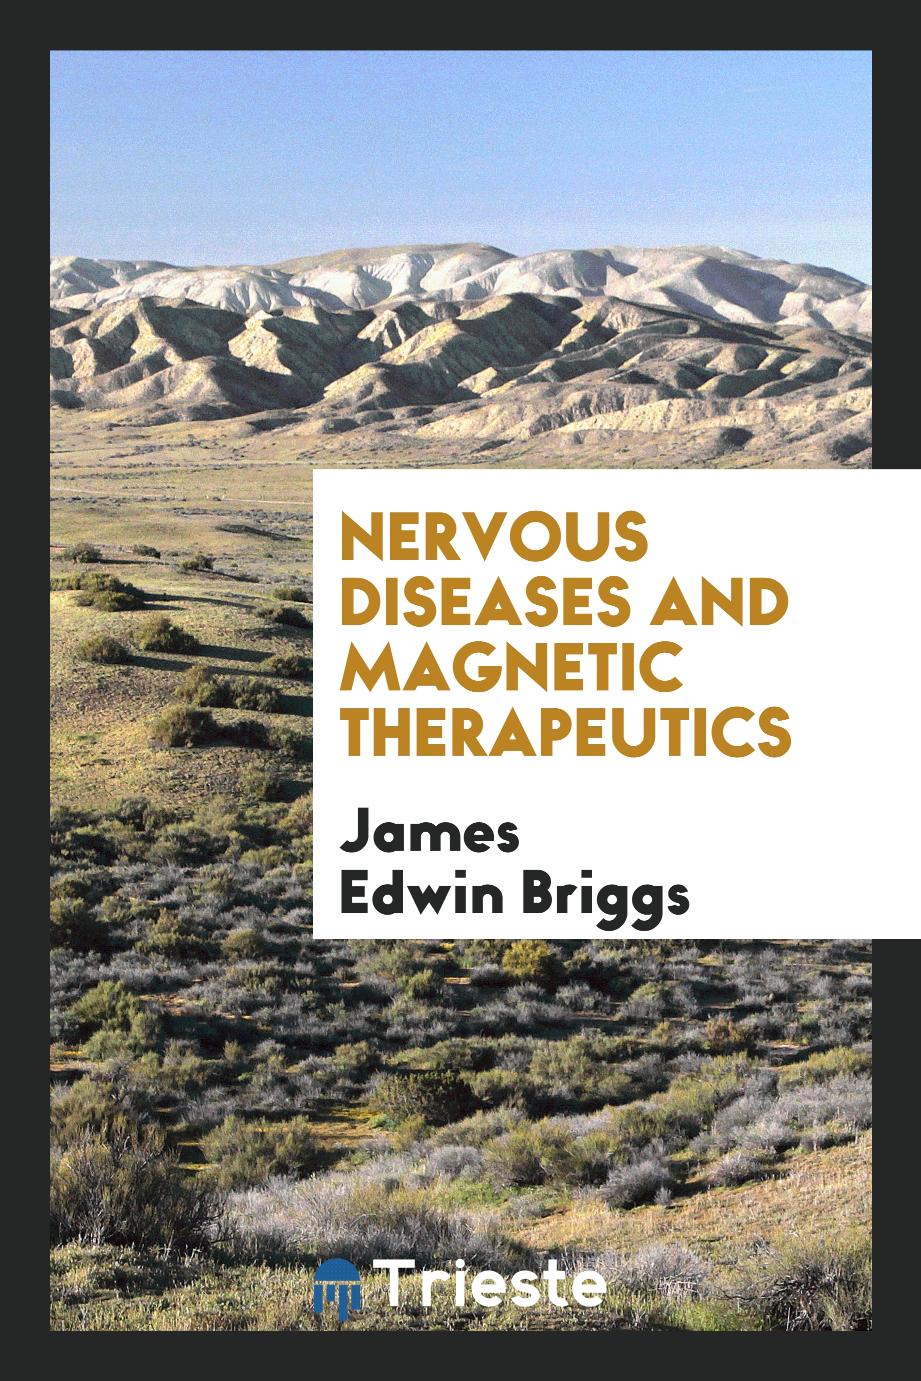 Nervous diseases and magnetic therapeutics